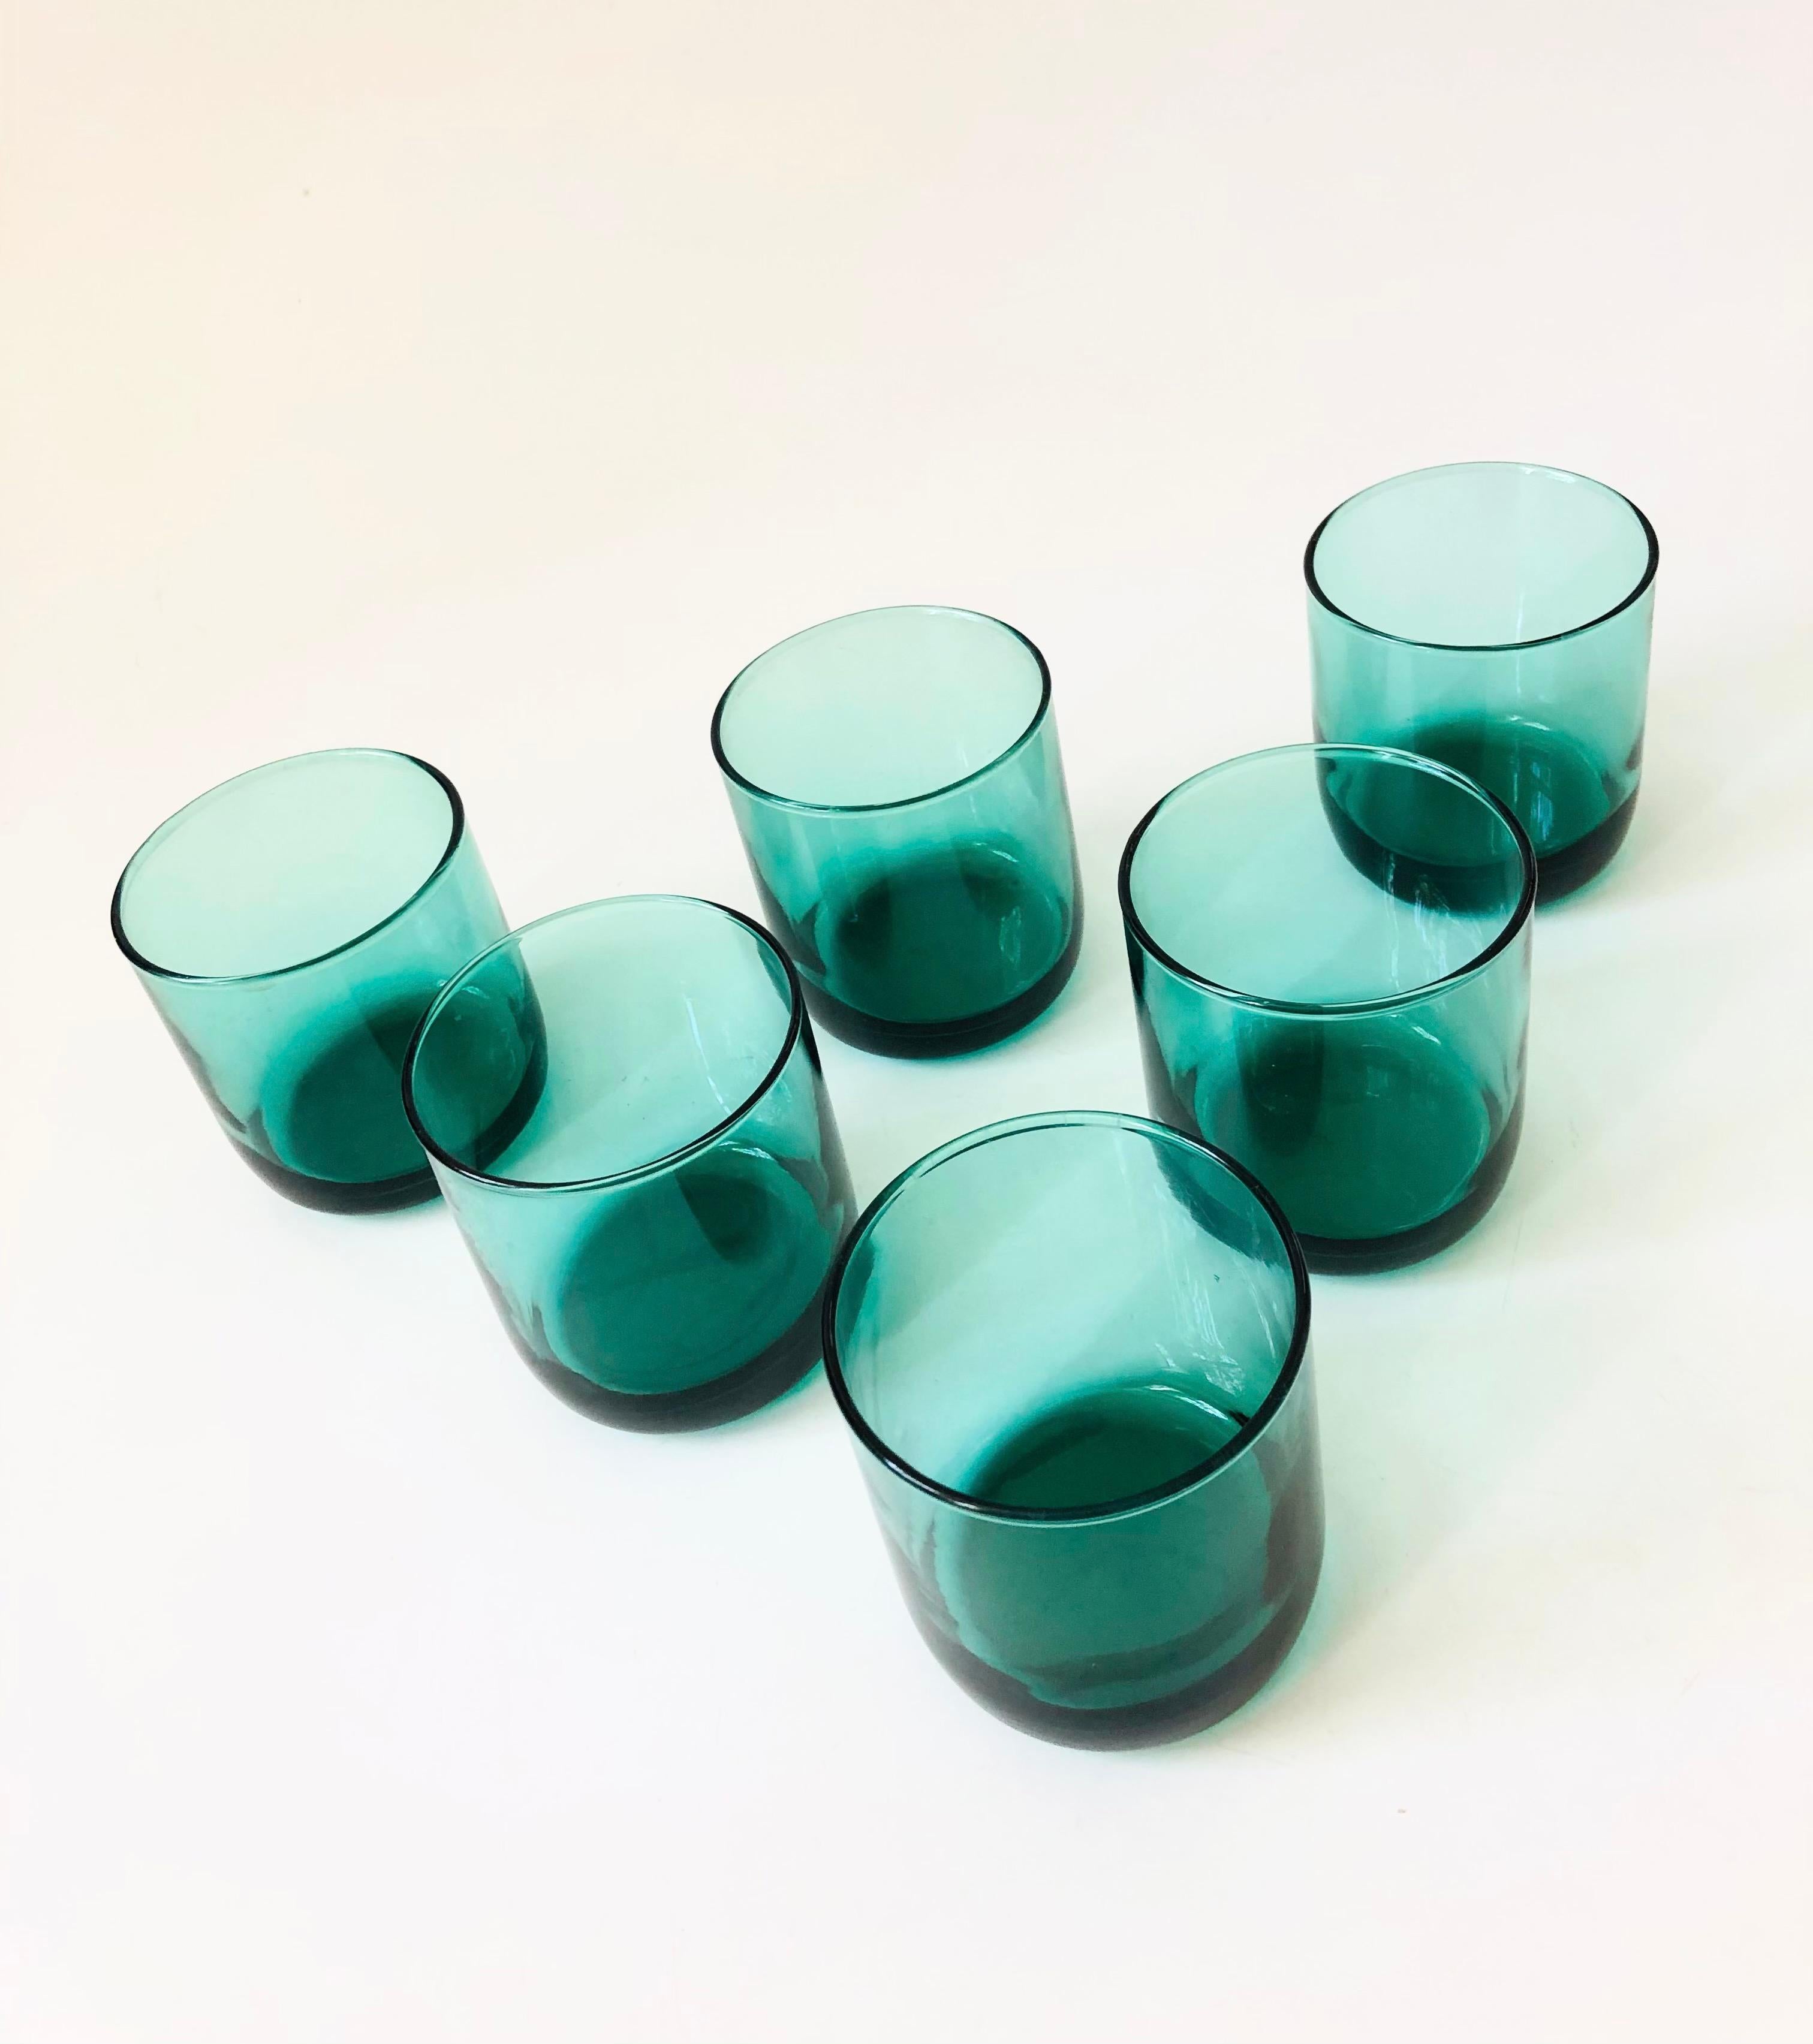 A set of 6 vintage lowball glasses in a moody dark teal color. Nice minimalist rounded shape. Made by Libbey. Perfect for using as juice glasses or for cocktails.

